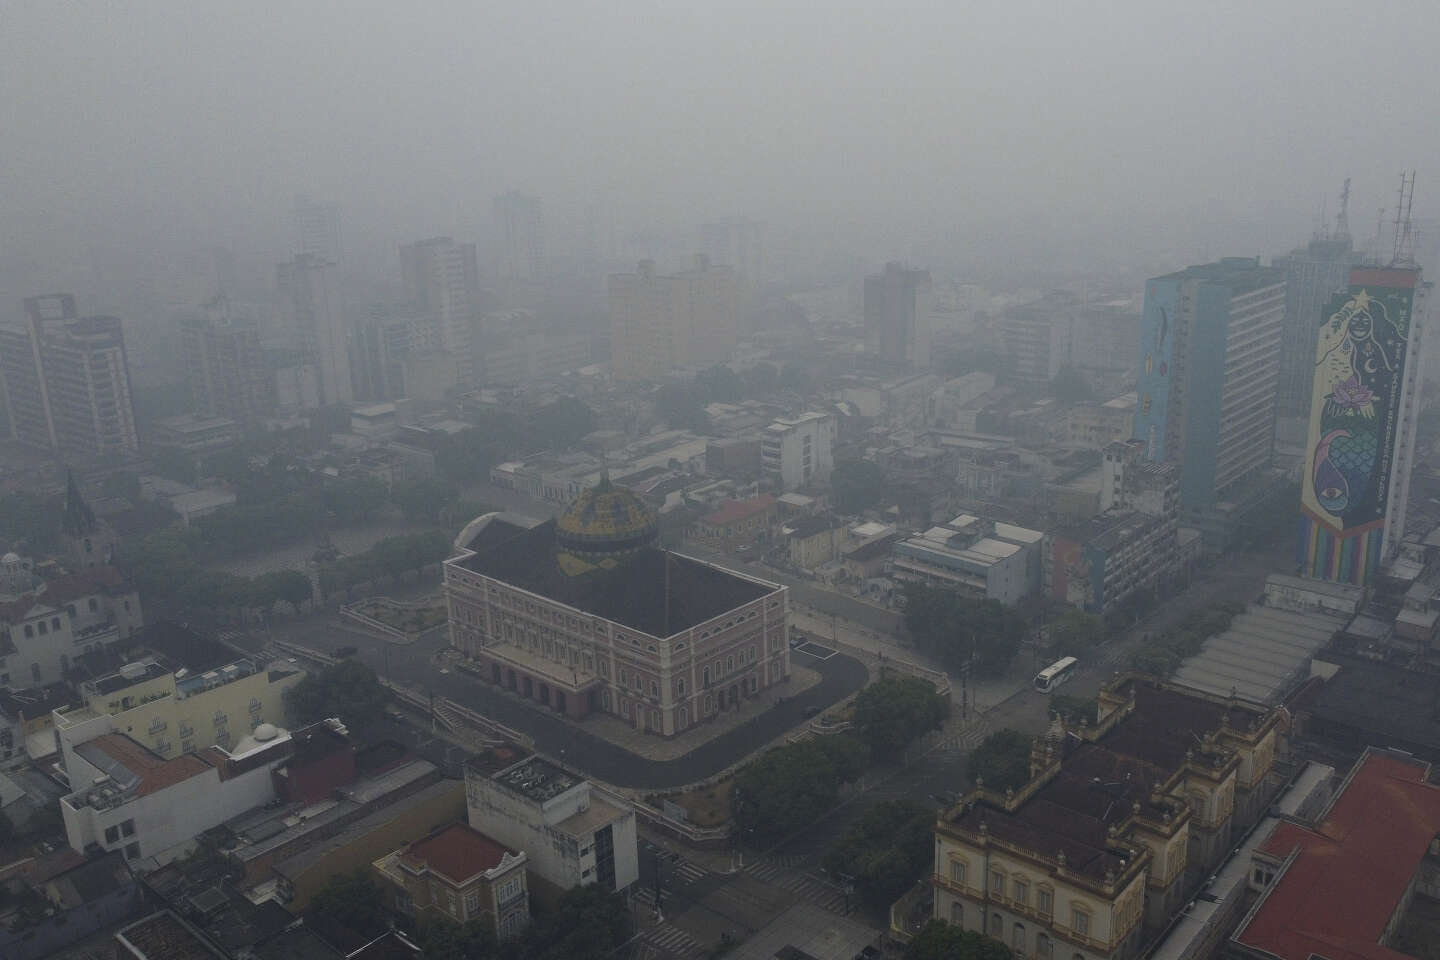 In Brazil, the city of Manaus is suffocating under the smoke of fires burning in the Amazon region